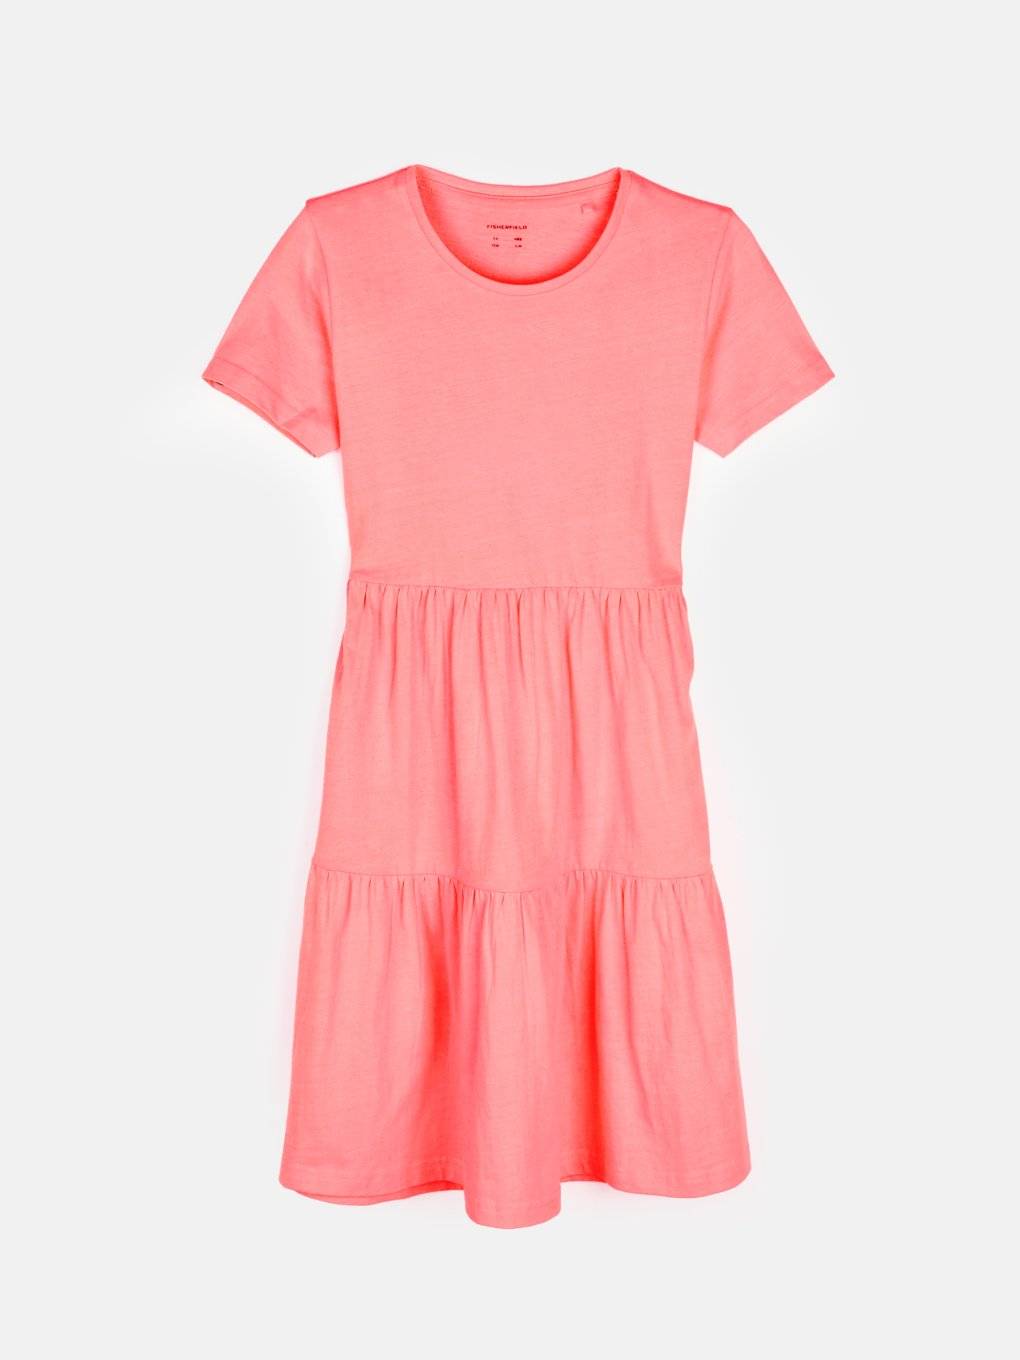 Cotton dress with ruffles